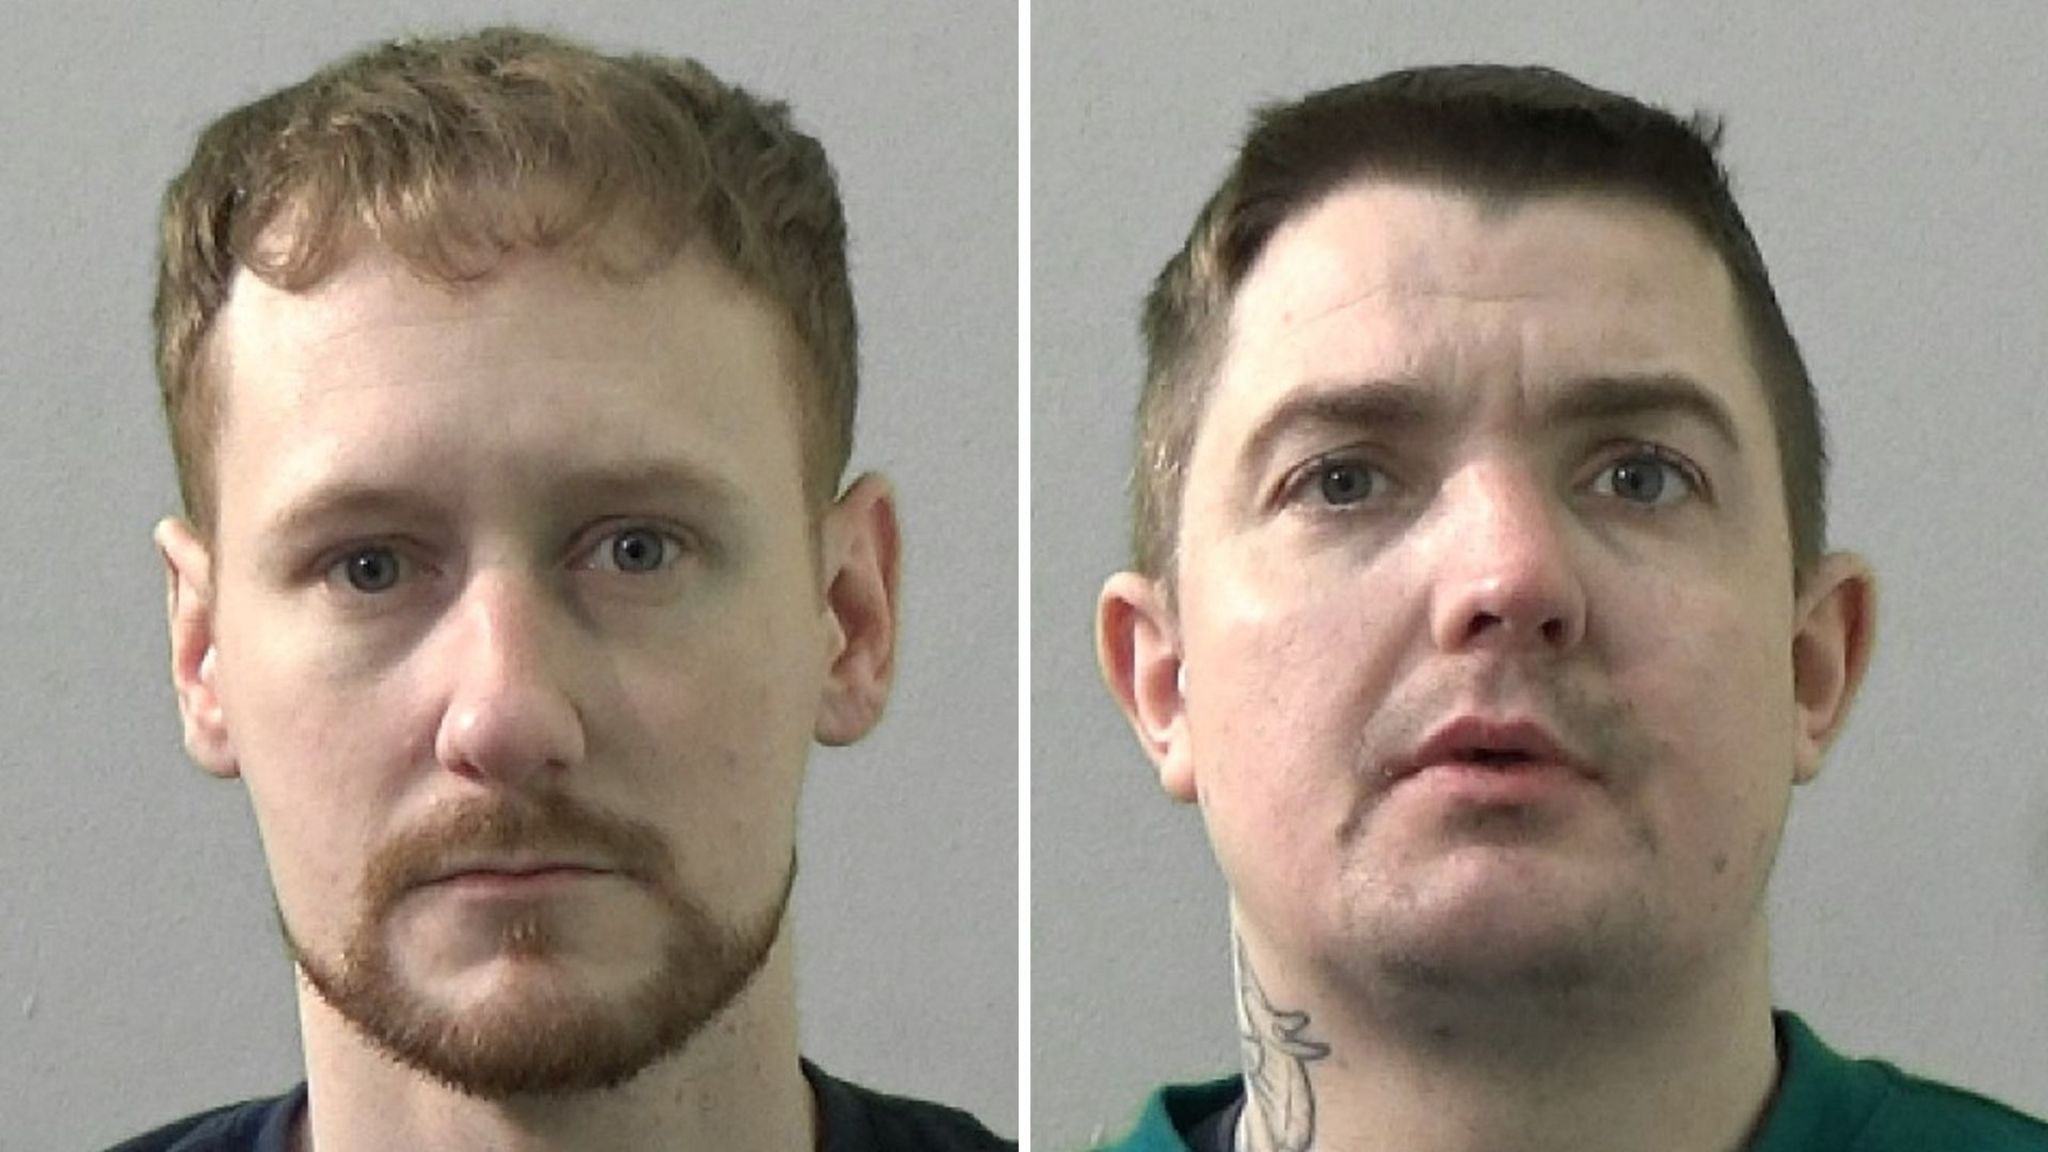 Mugshots of Paul Fawcett and John Wandless, one with a ginger beard and the other with a large tattoo on his neck